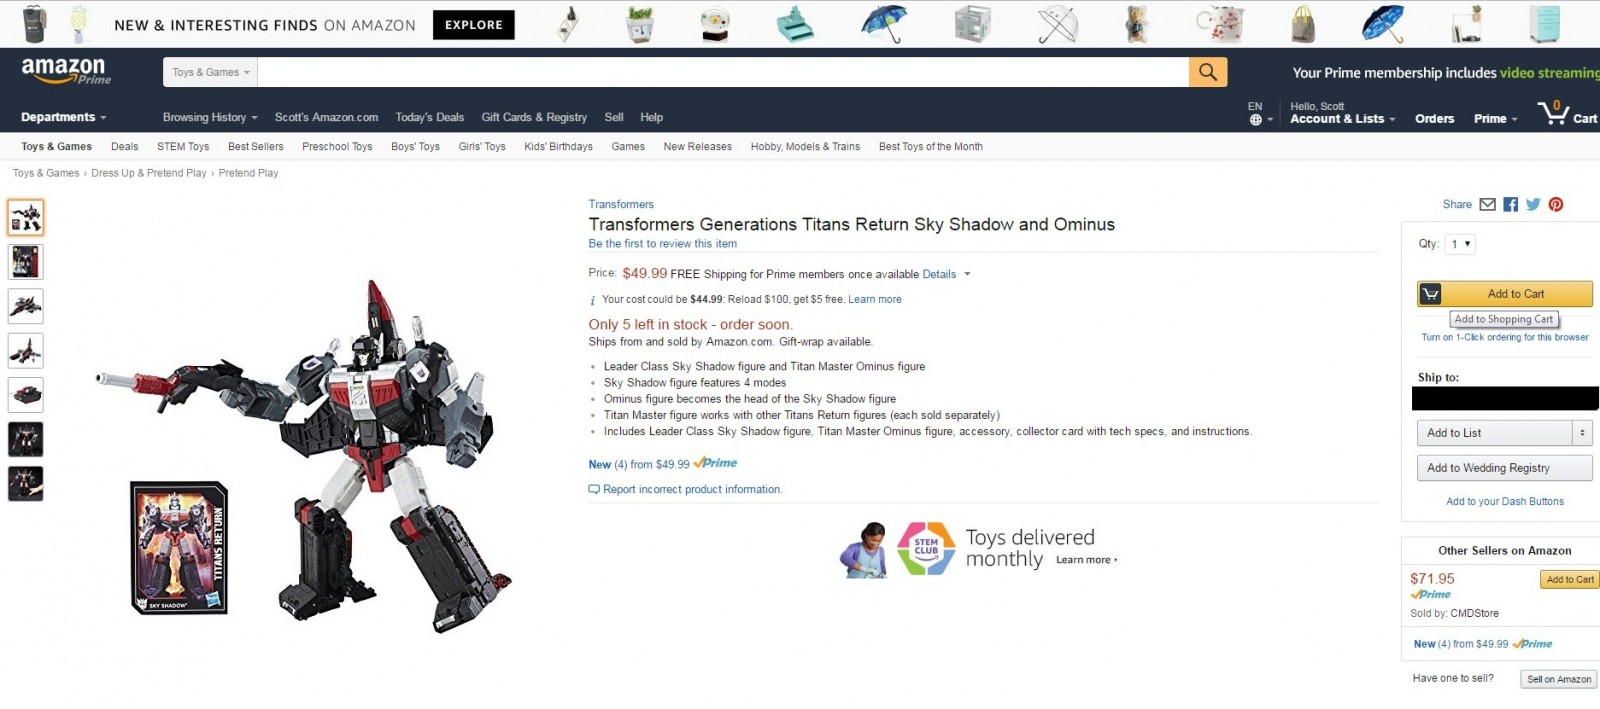 Transformers News: Titans Return Sky Shadow In and Out of Stock at Amazon.com